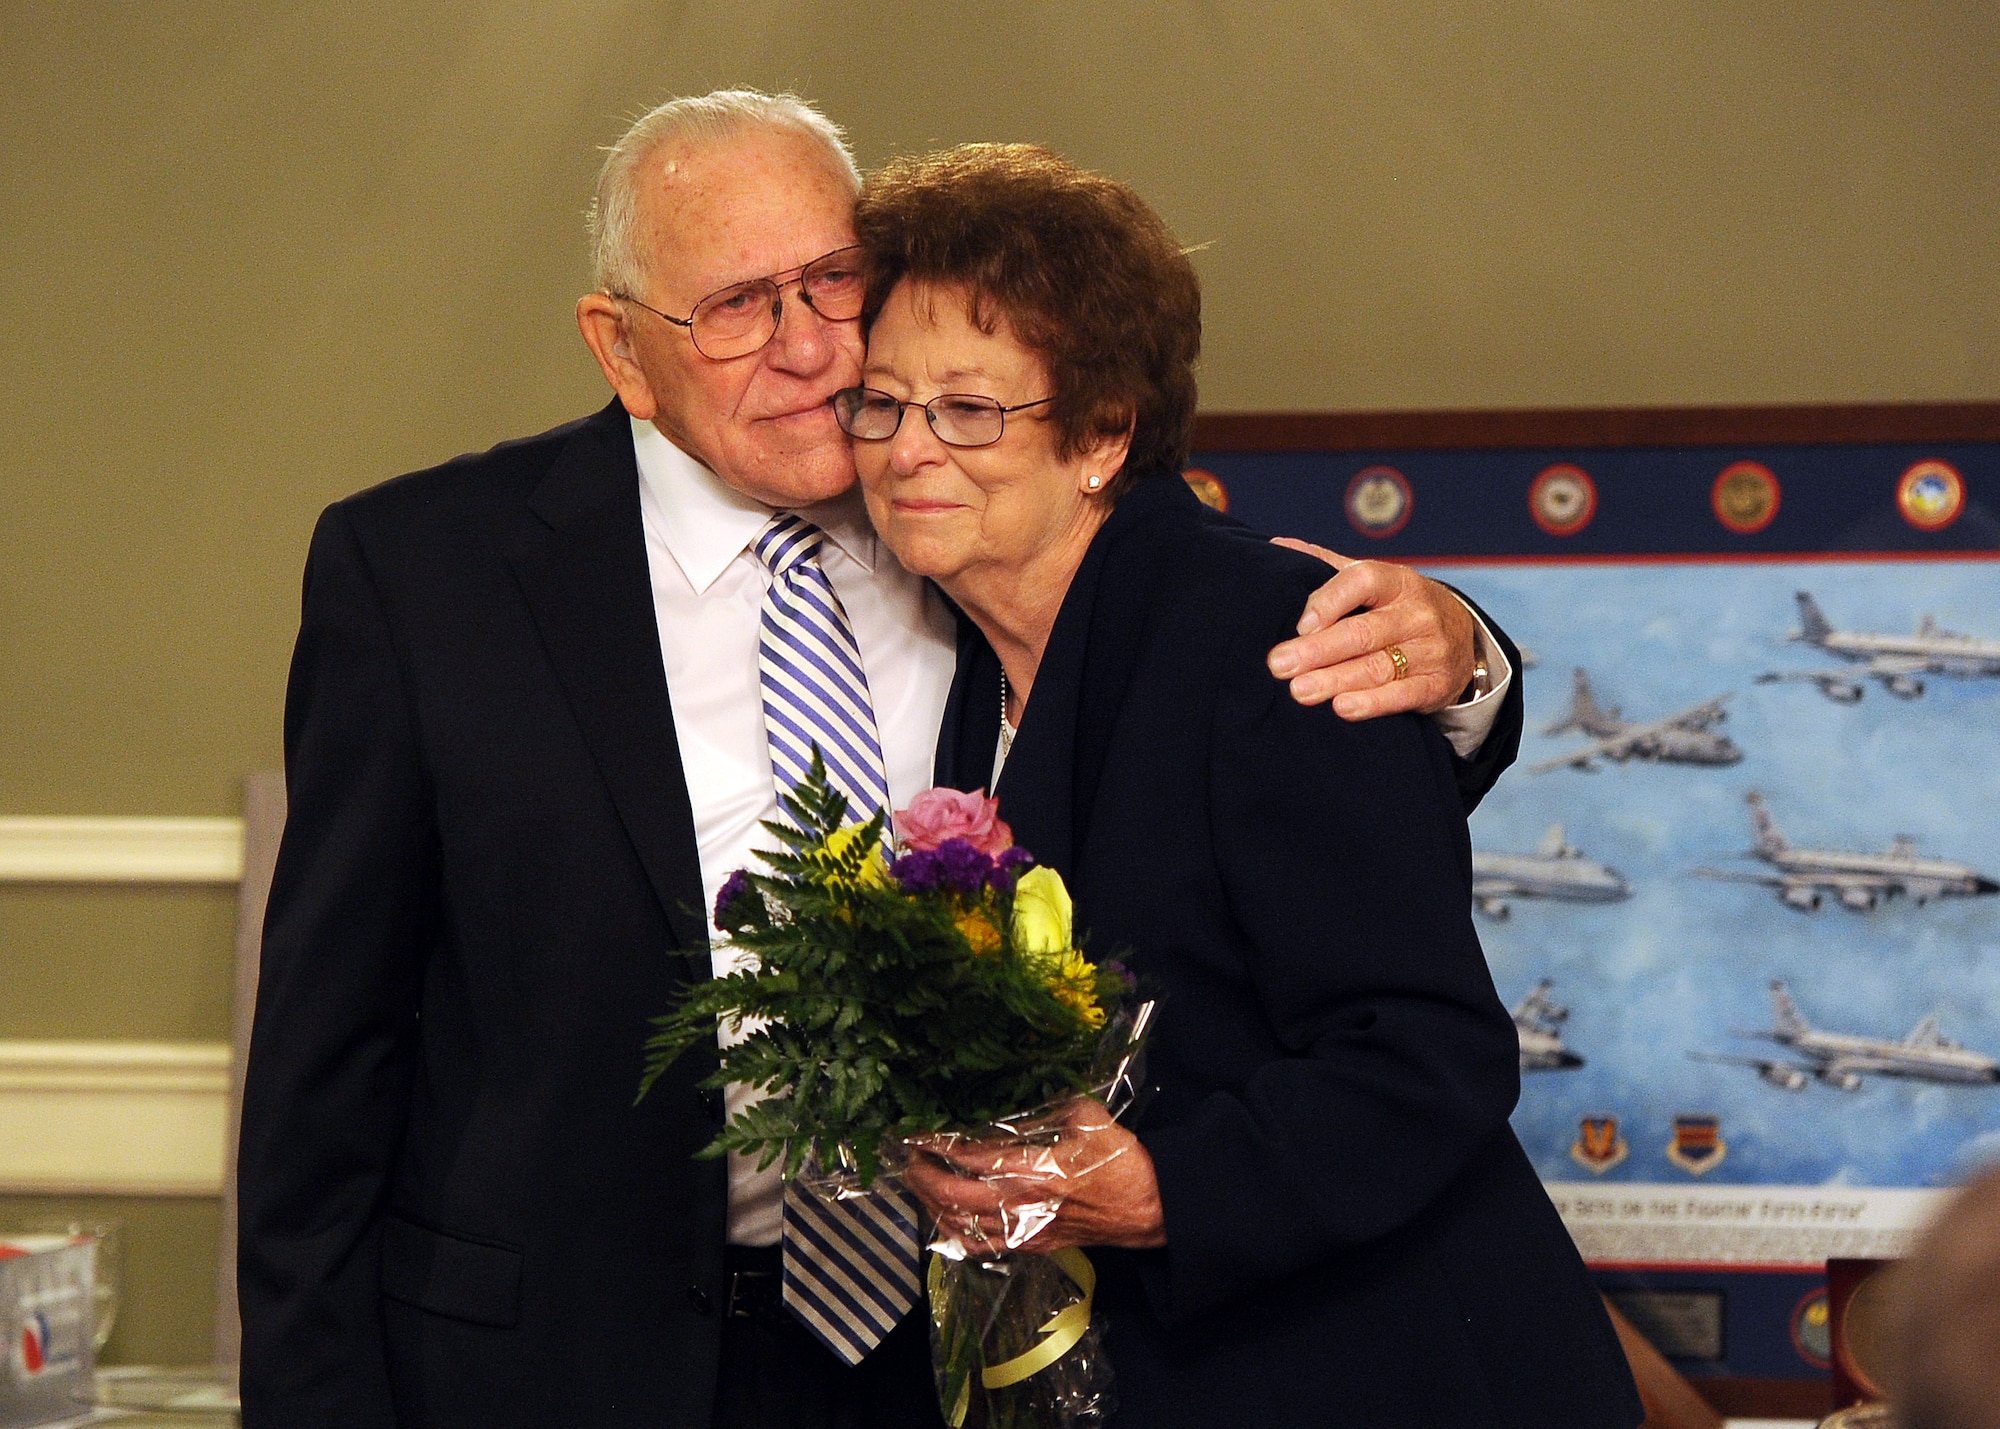 James Norwood, an electronic intelligence advisor with the National Security Agency’s representative office at United States Strategic Command, embraces his wife Jean while saying his farewell at his retirement ceremony held at the Patriot Club July 31 on Offutt Air Force Base, Neb.  Jean has been alongside her husband for 59 years of his nearly 60 years of federal service.  (U.S. Air Force photo by Josh Plueger/Released)